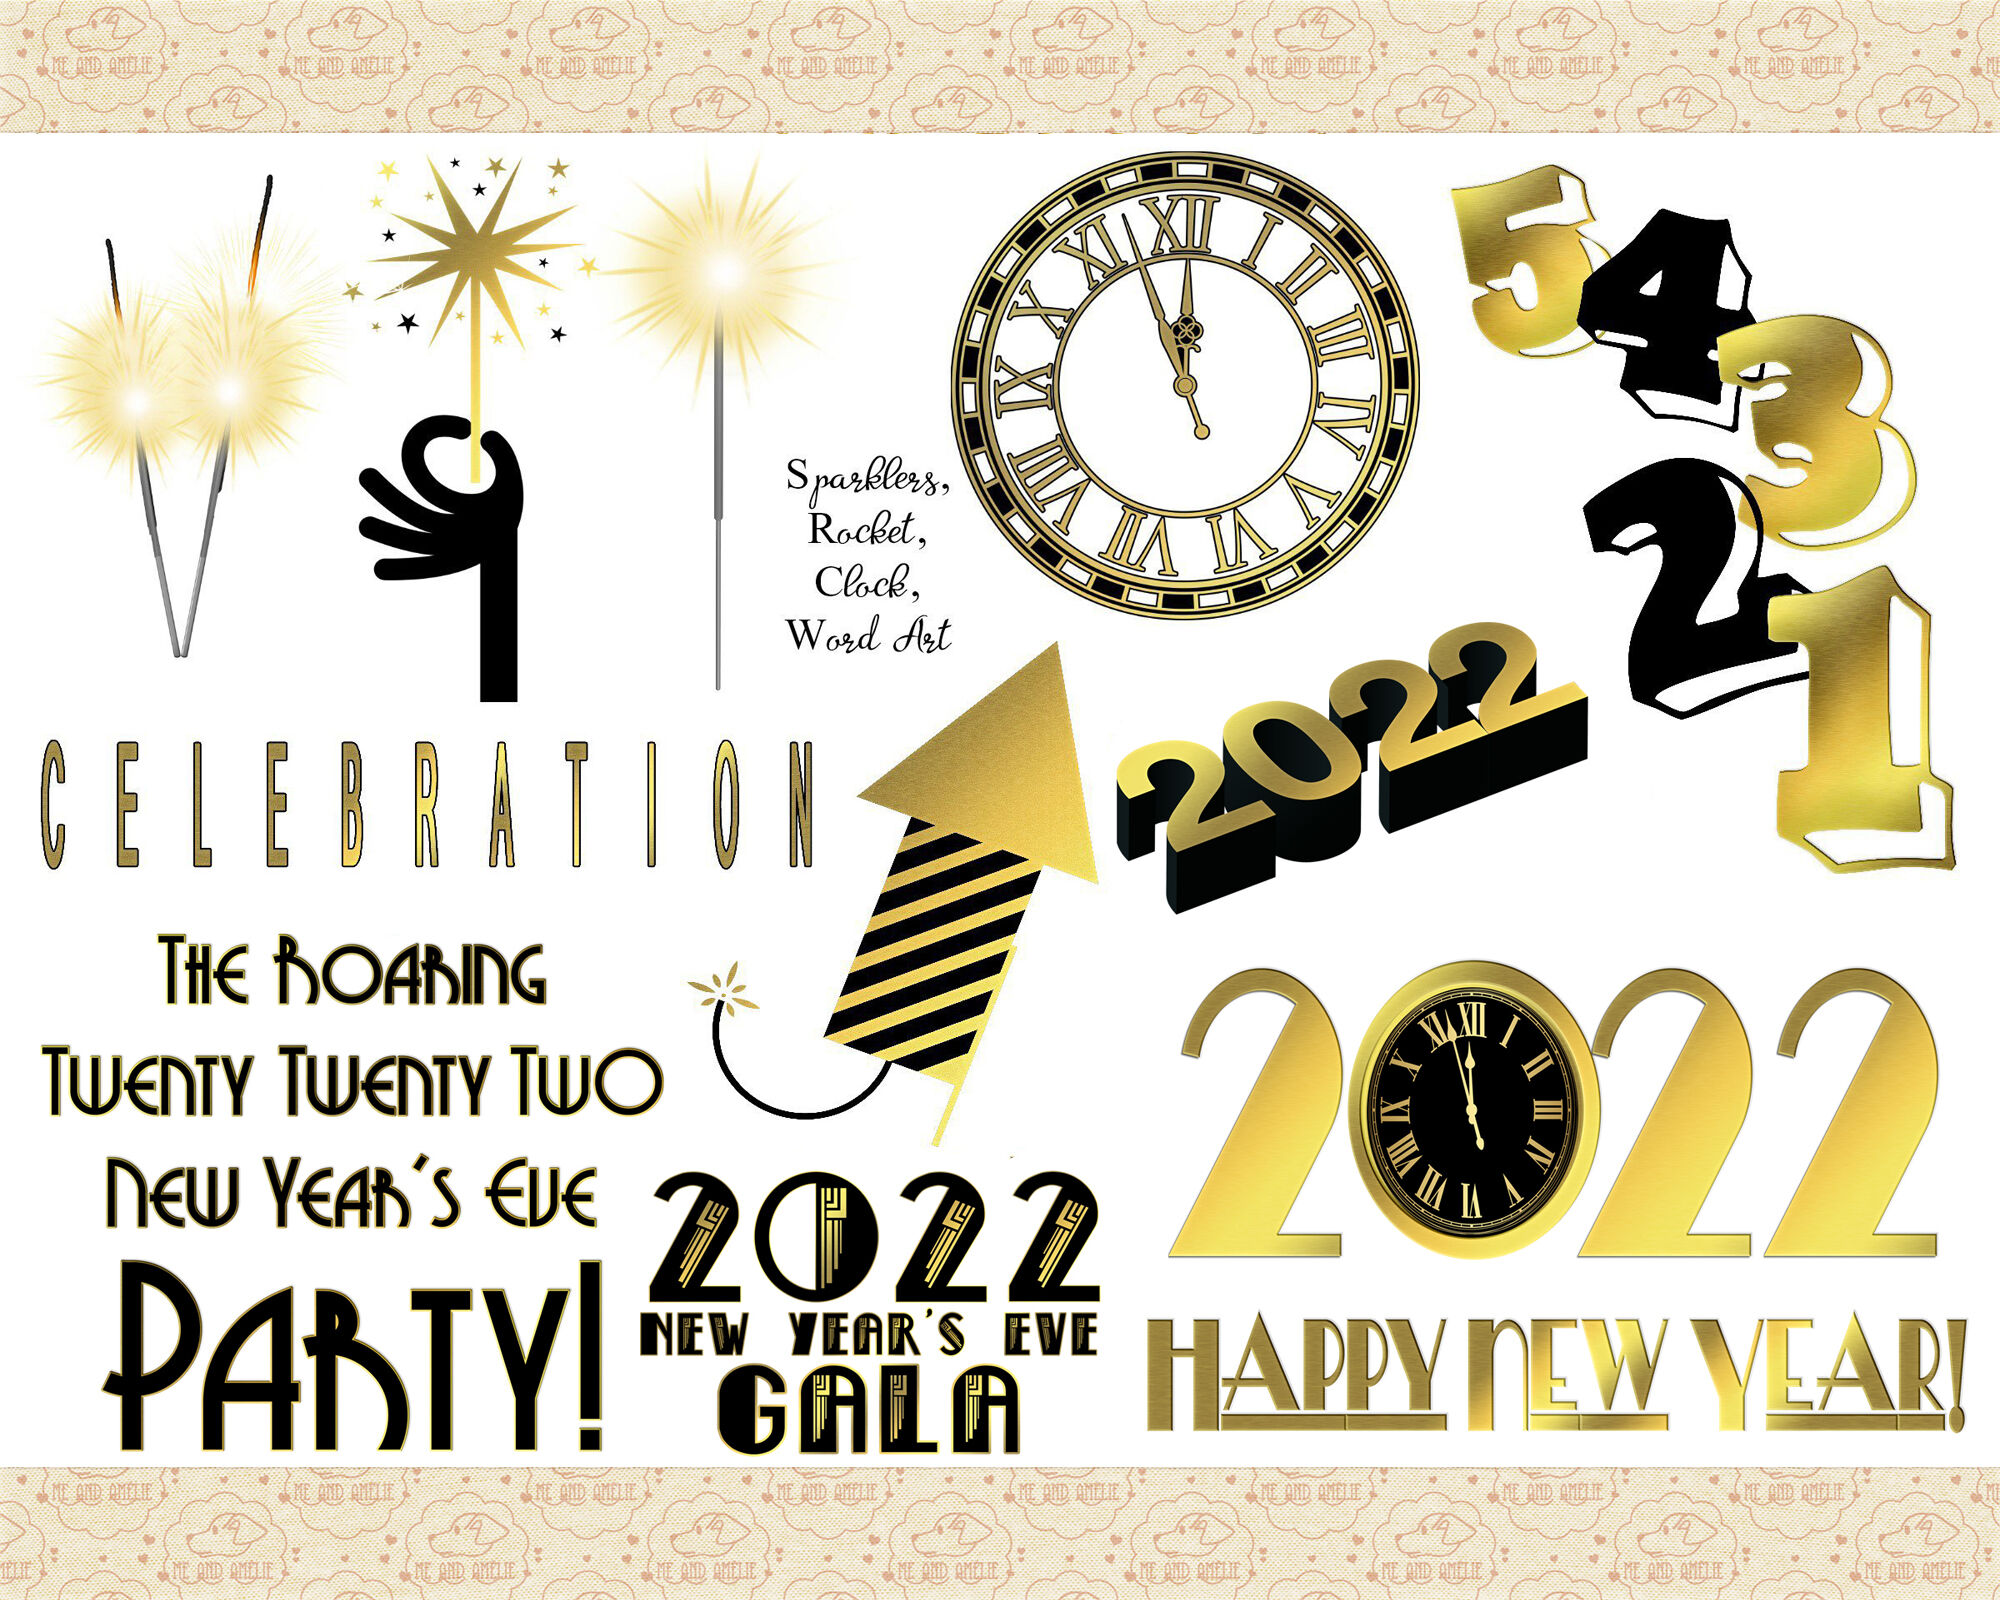 2022 new years eve clip art